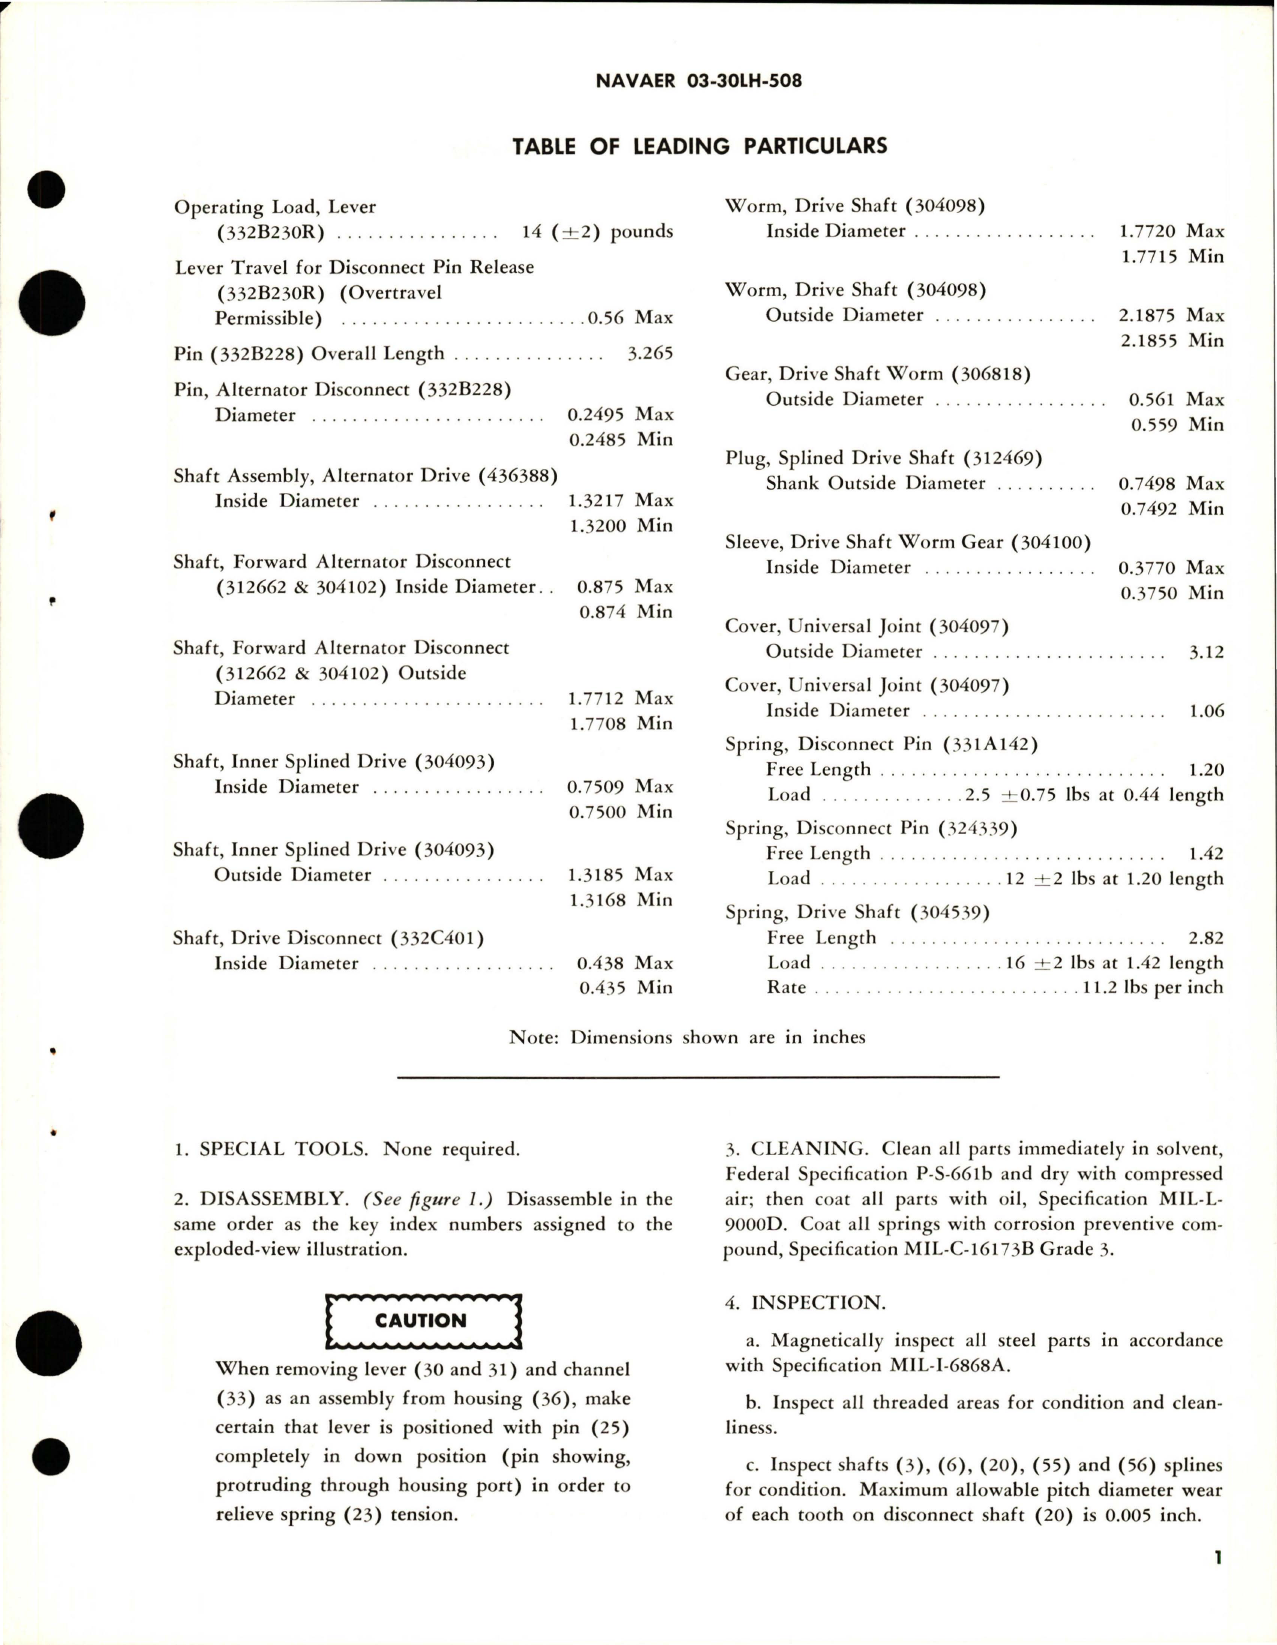 Sample page 7 from AirCorps Library document: Overhaul Instructions with Parts Breakdown for Drive Shaft & Disconnect Assembly - 30 KVA Alternator - Part 438351